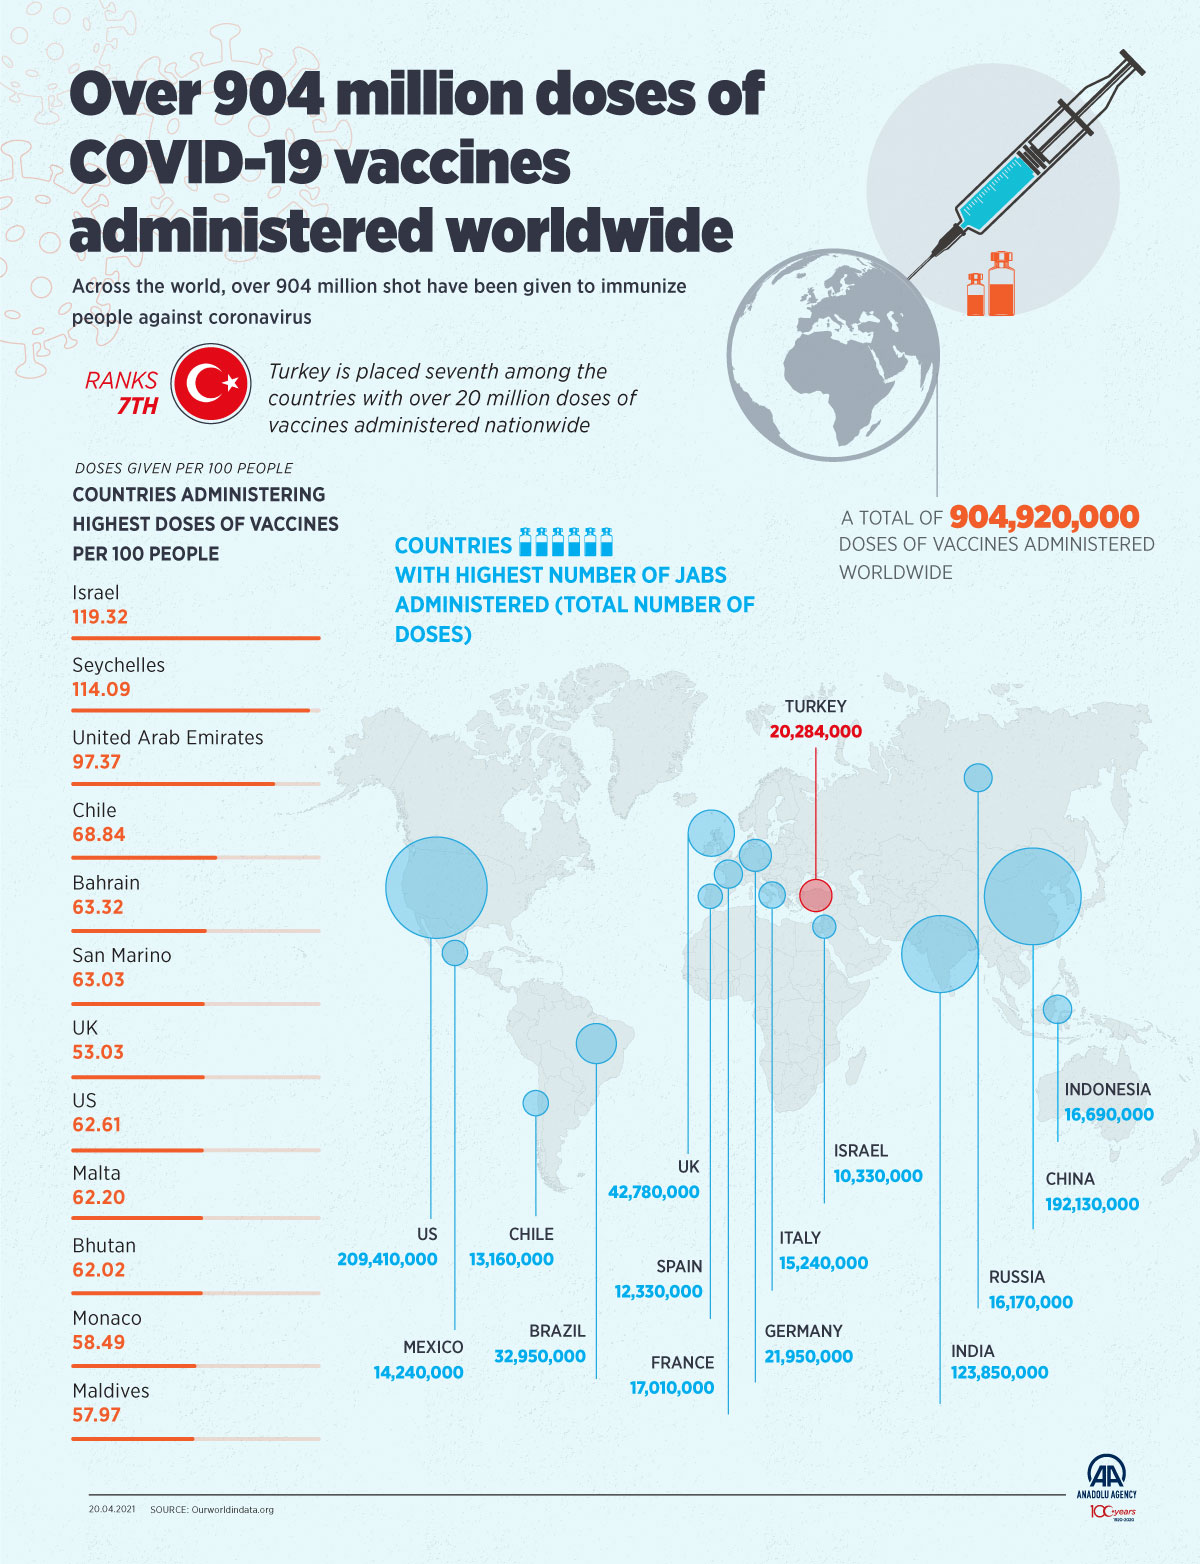 Over 904 million doses of COVID-19 vaccines administered worldwide